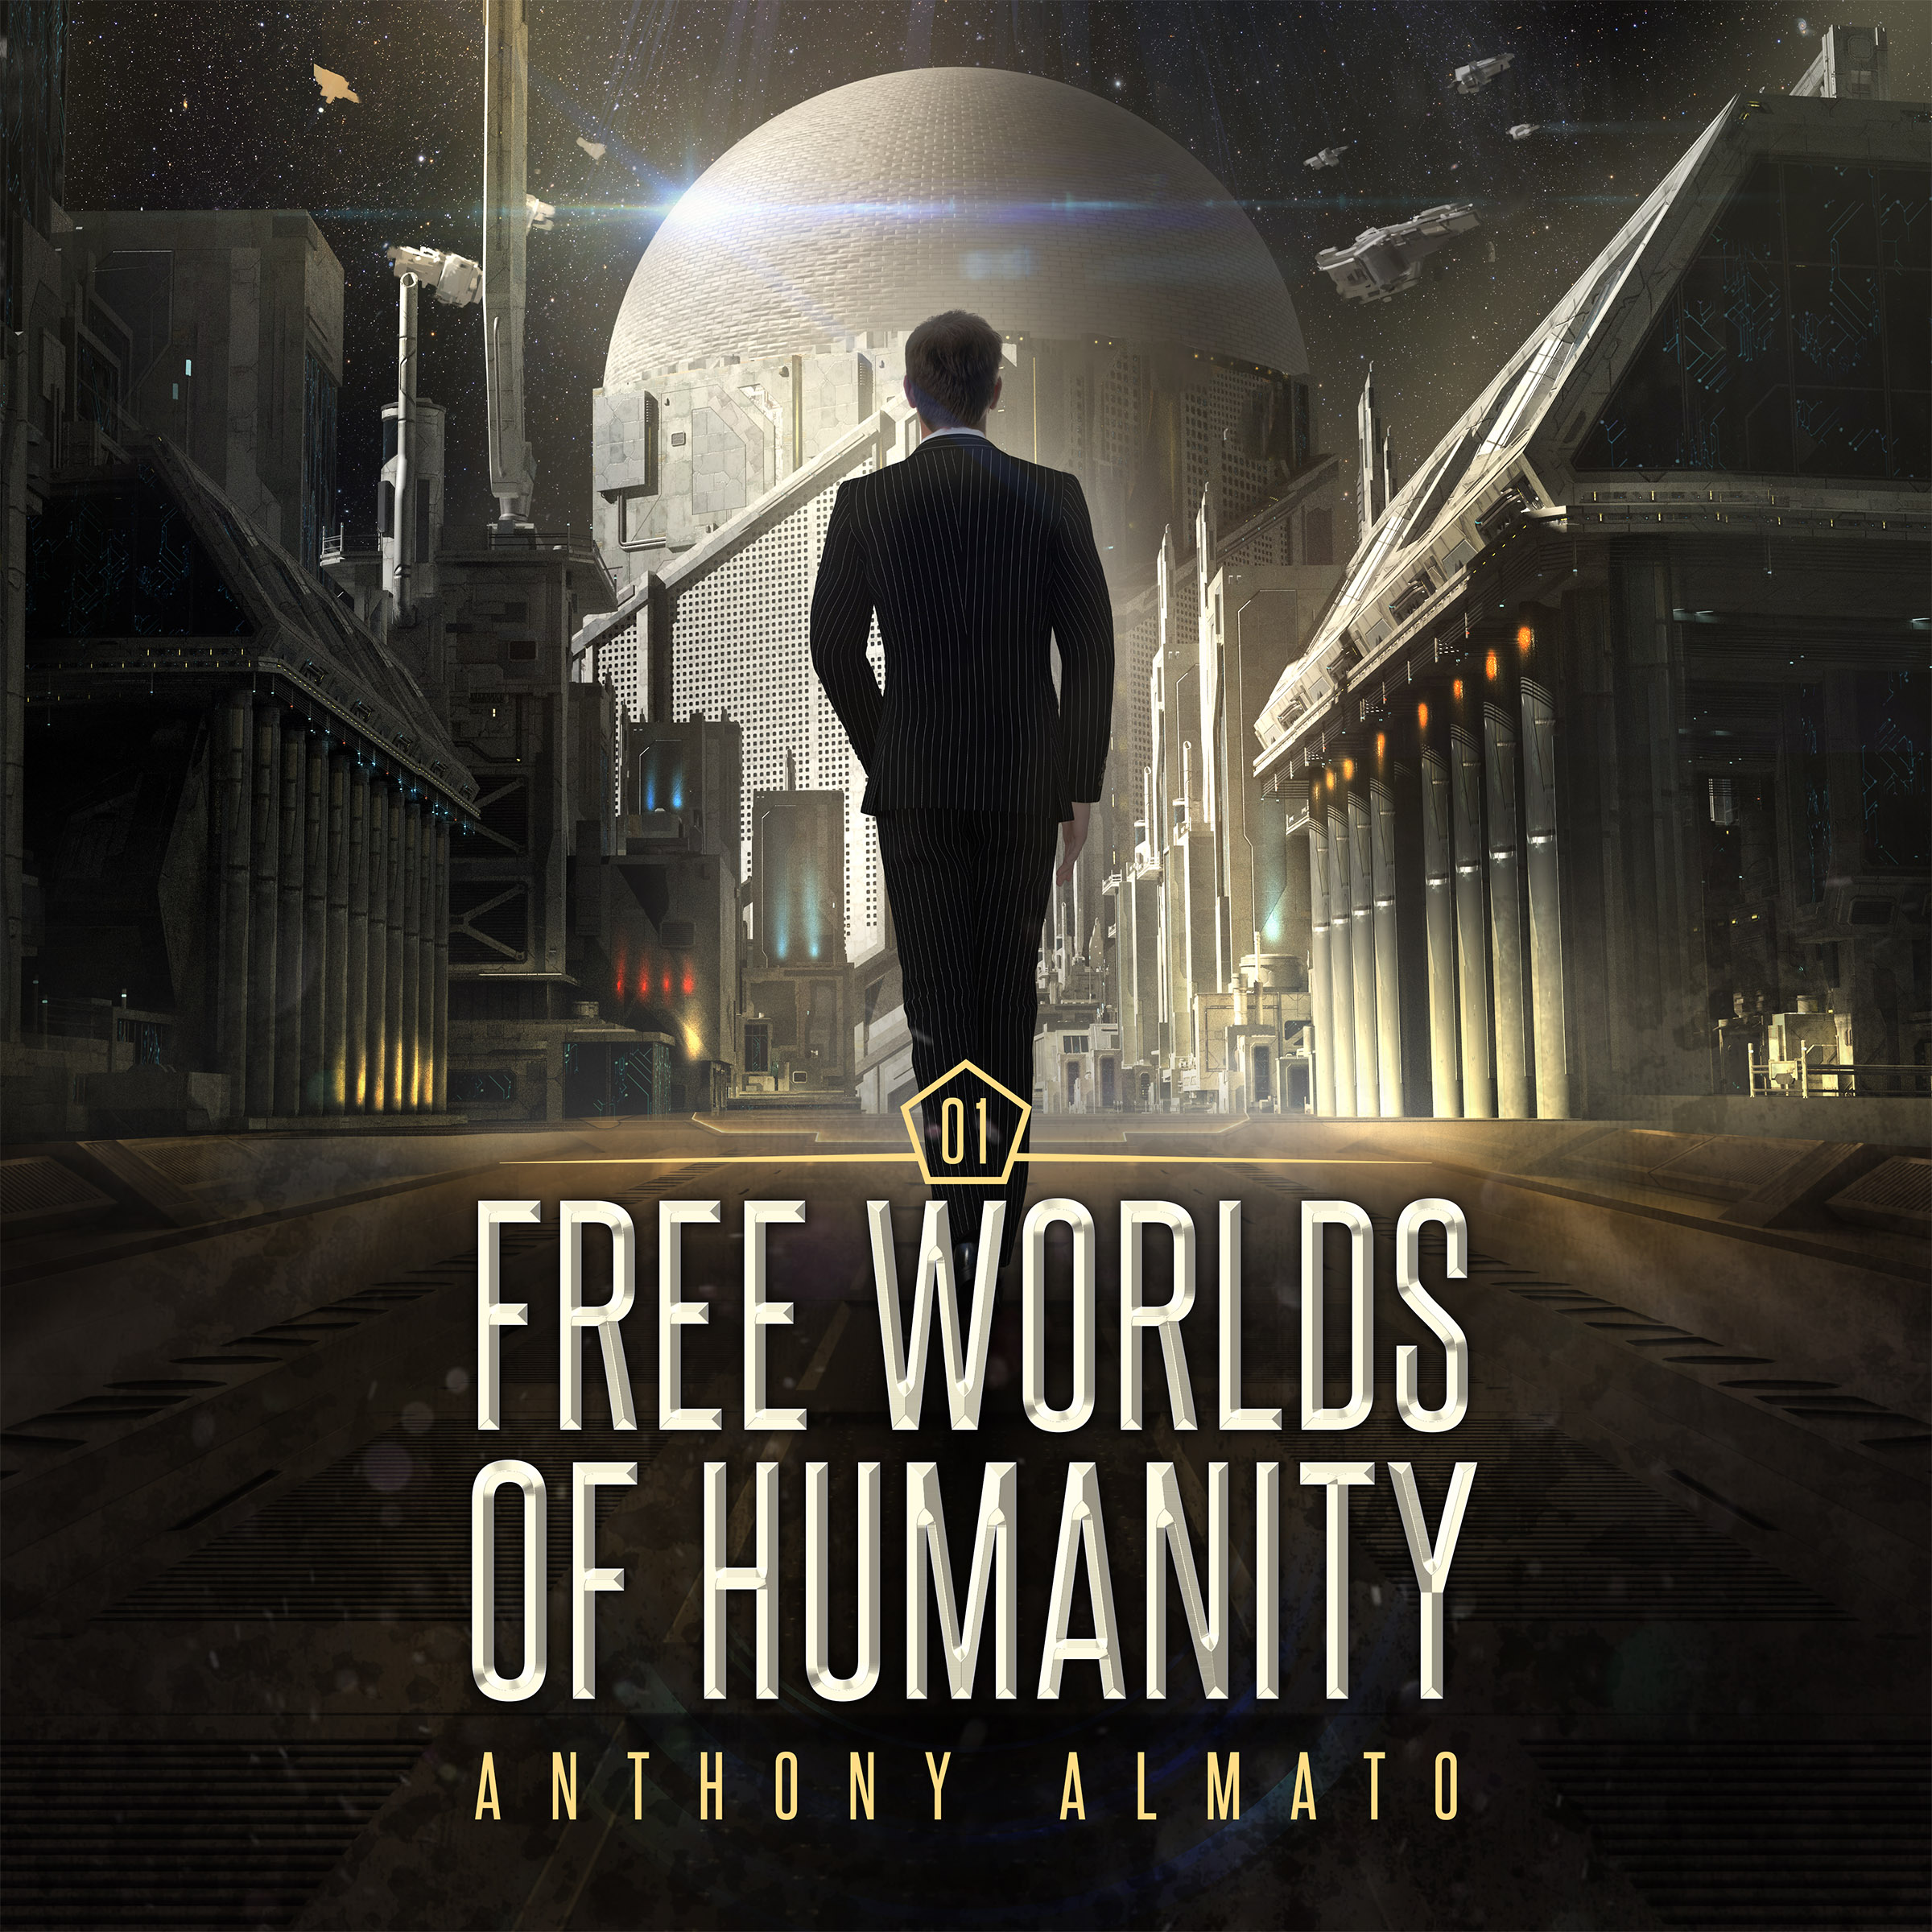 FREE: Free Worlds of Humanity by Anthony Almato